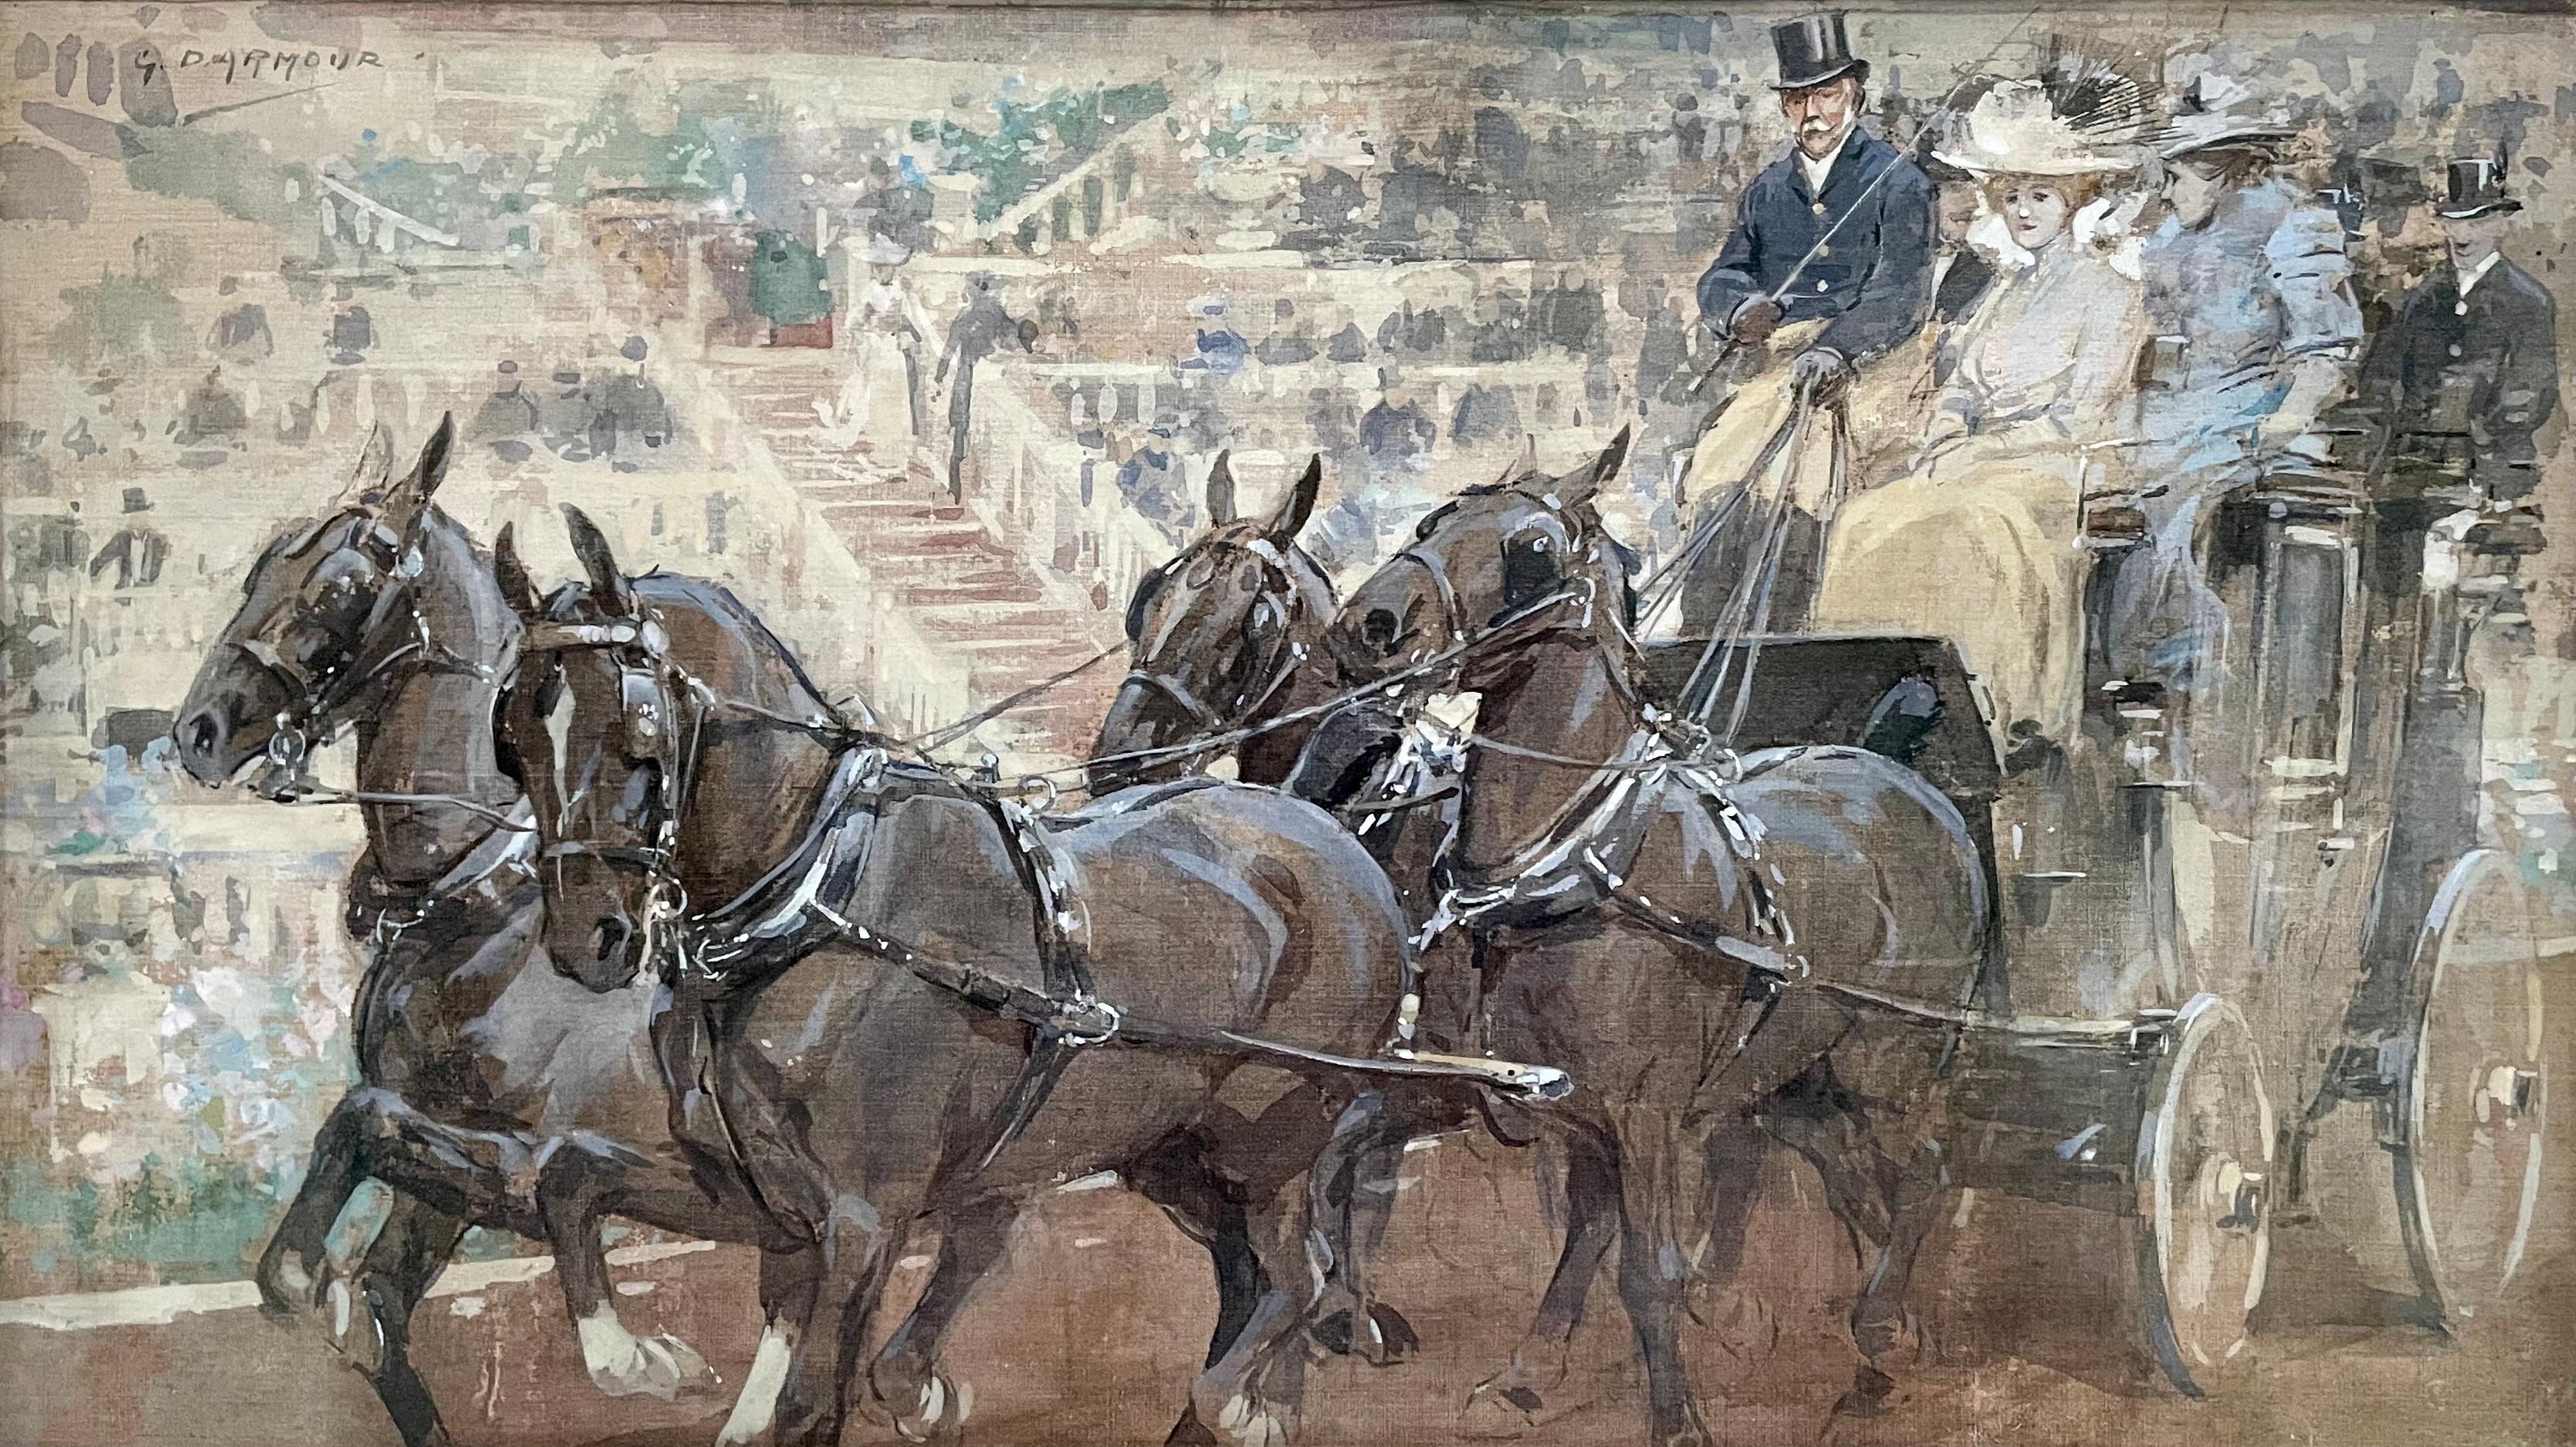 Modern Coaching, Early 20th Century British Equestrian watercolour by G D Armour